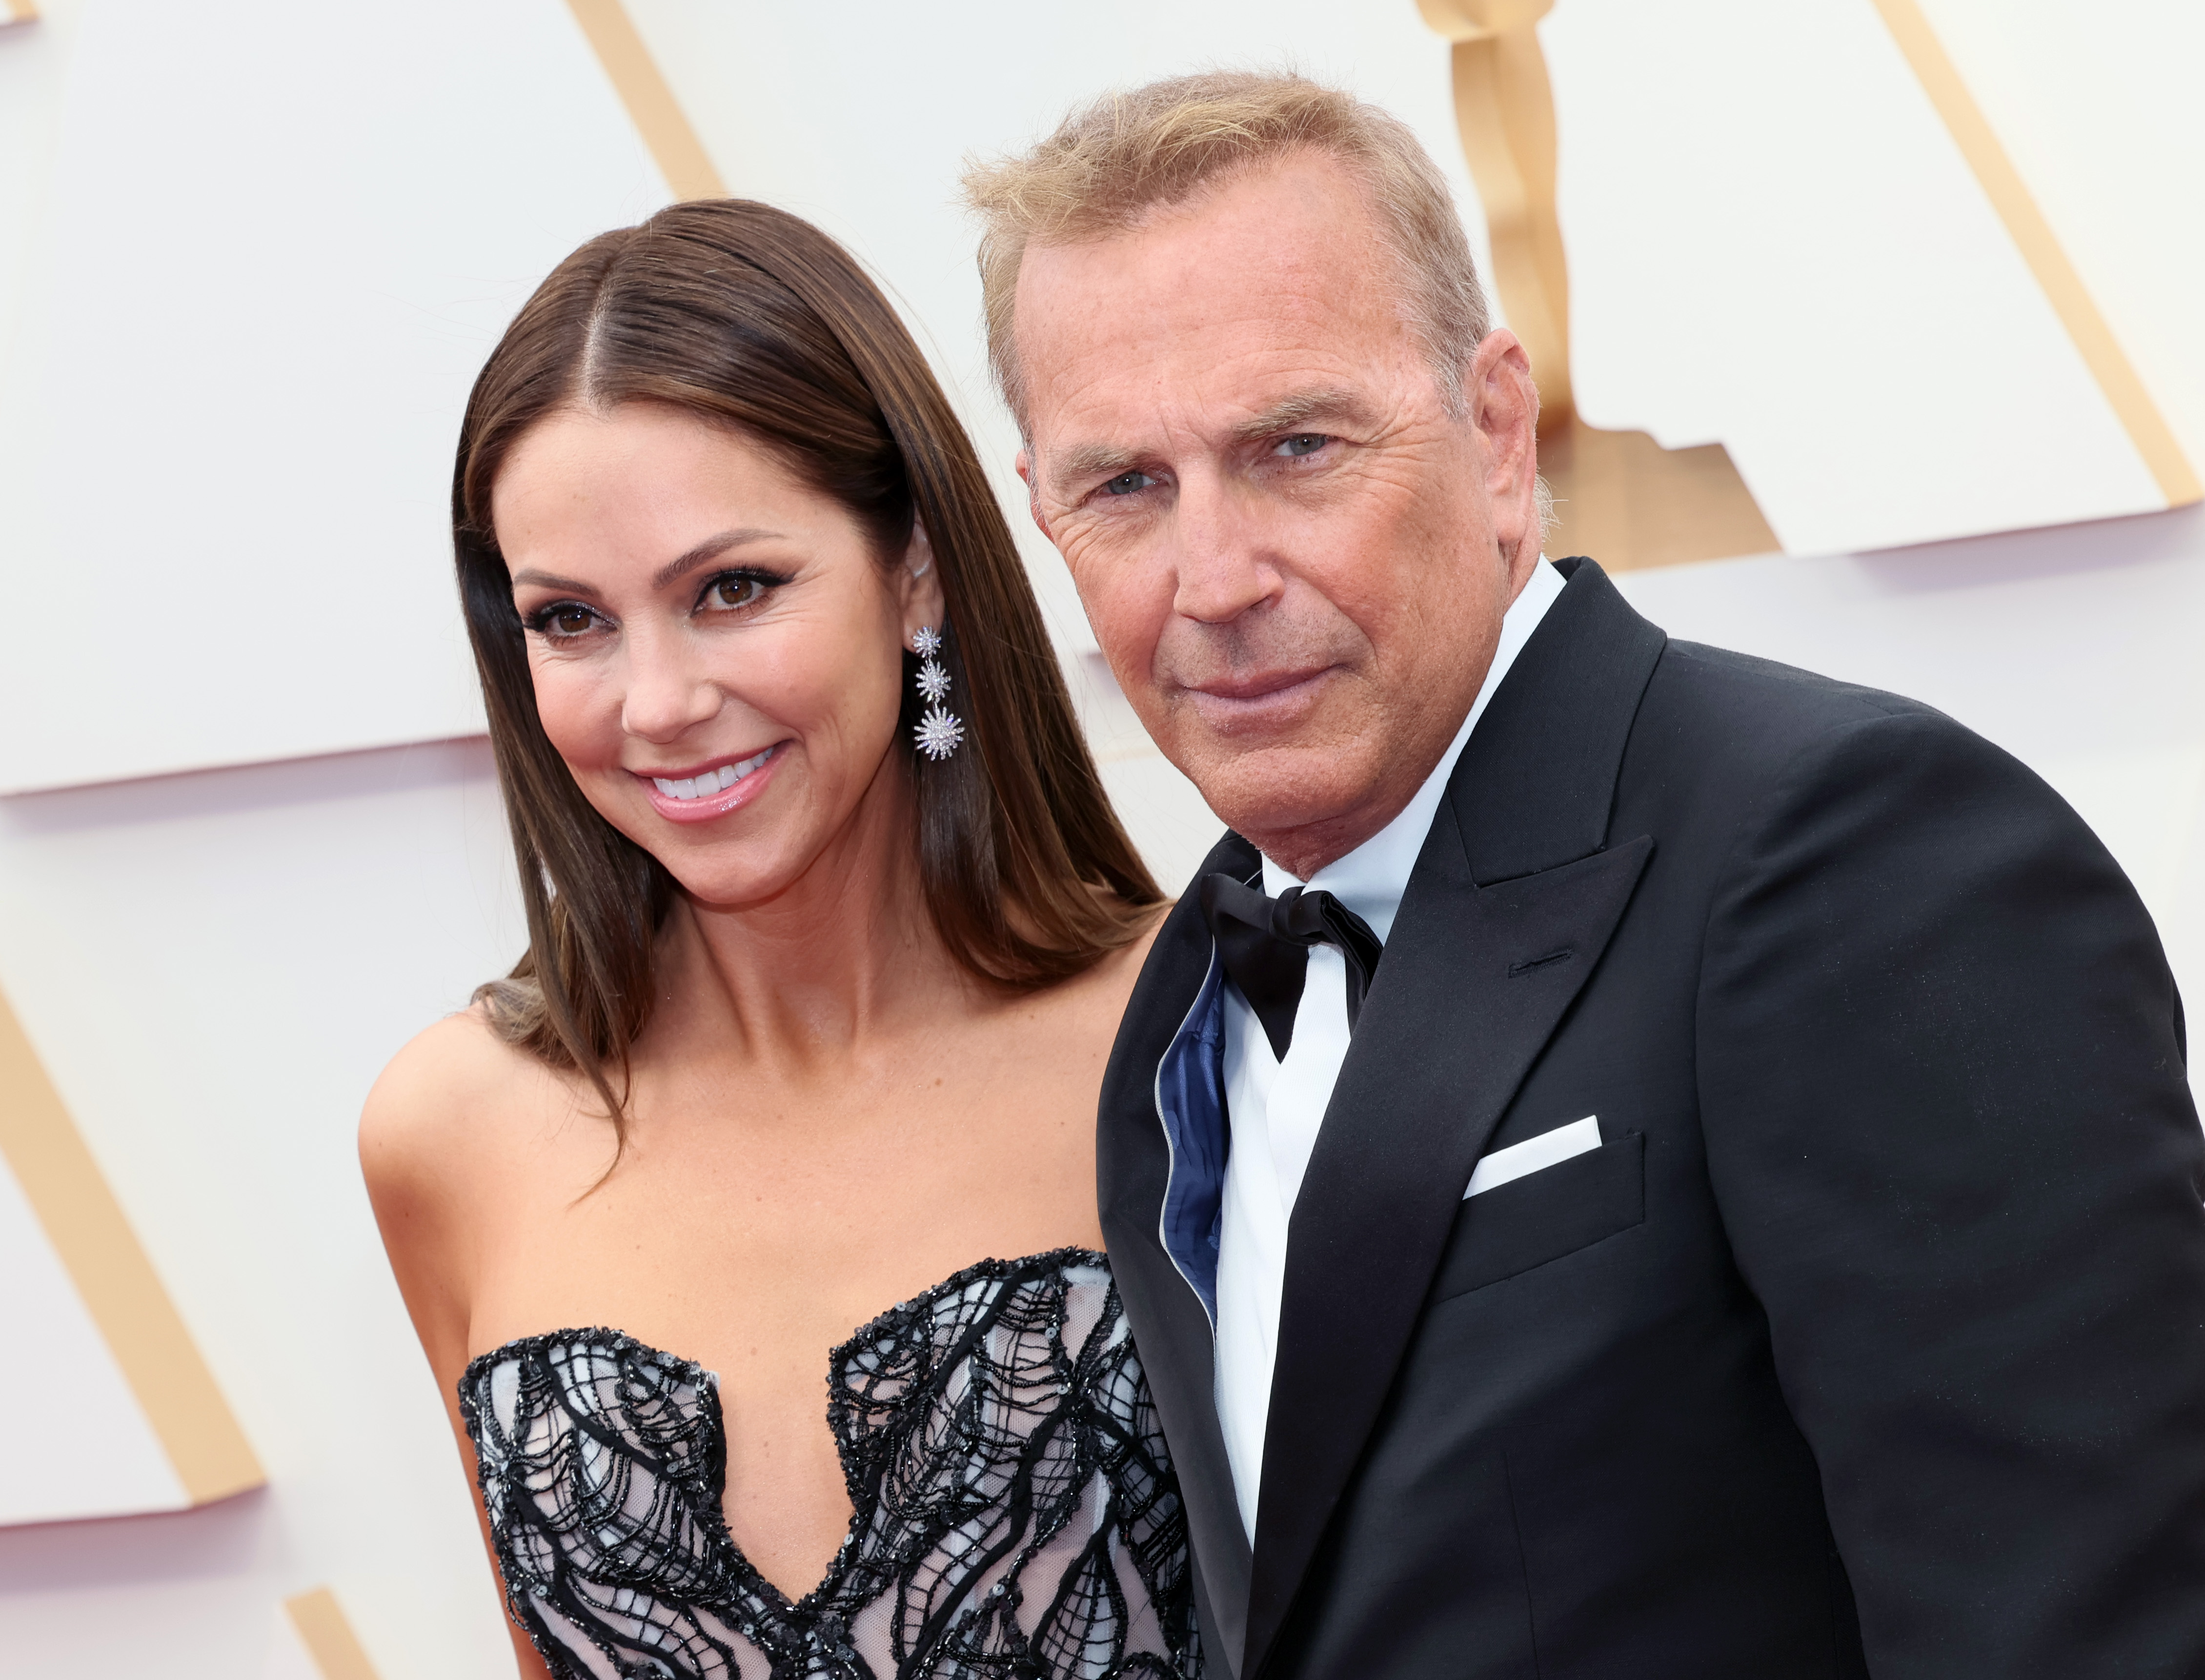 Christine Baumgartner and Kevin Costner at the 94th Annual Academy Awards in Hollywood, 2022 | Source: Getty Images